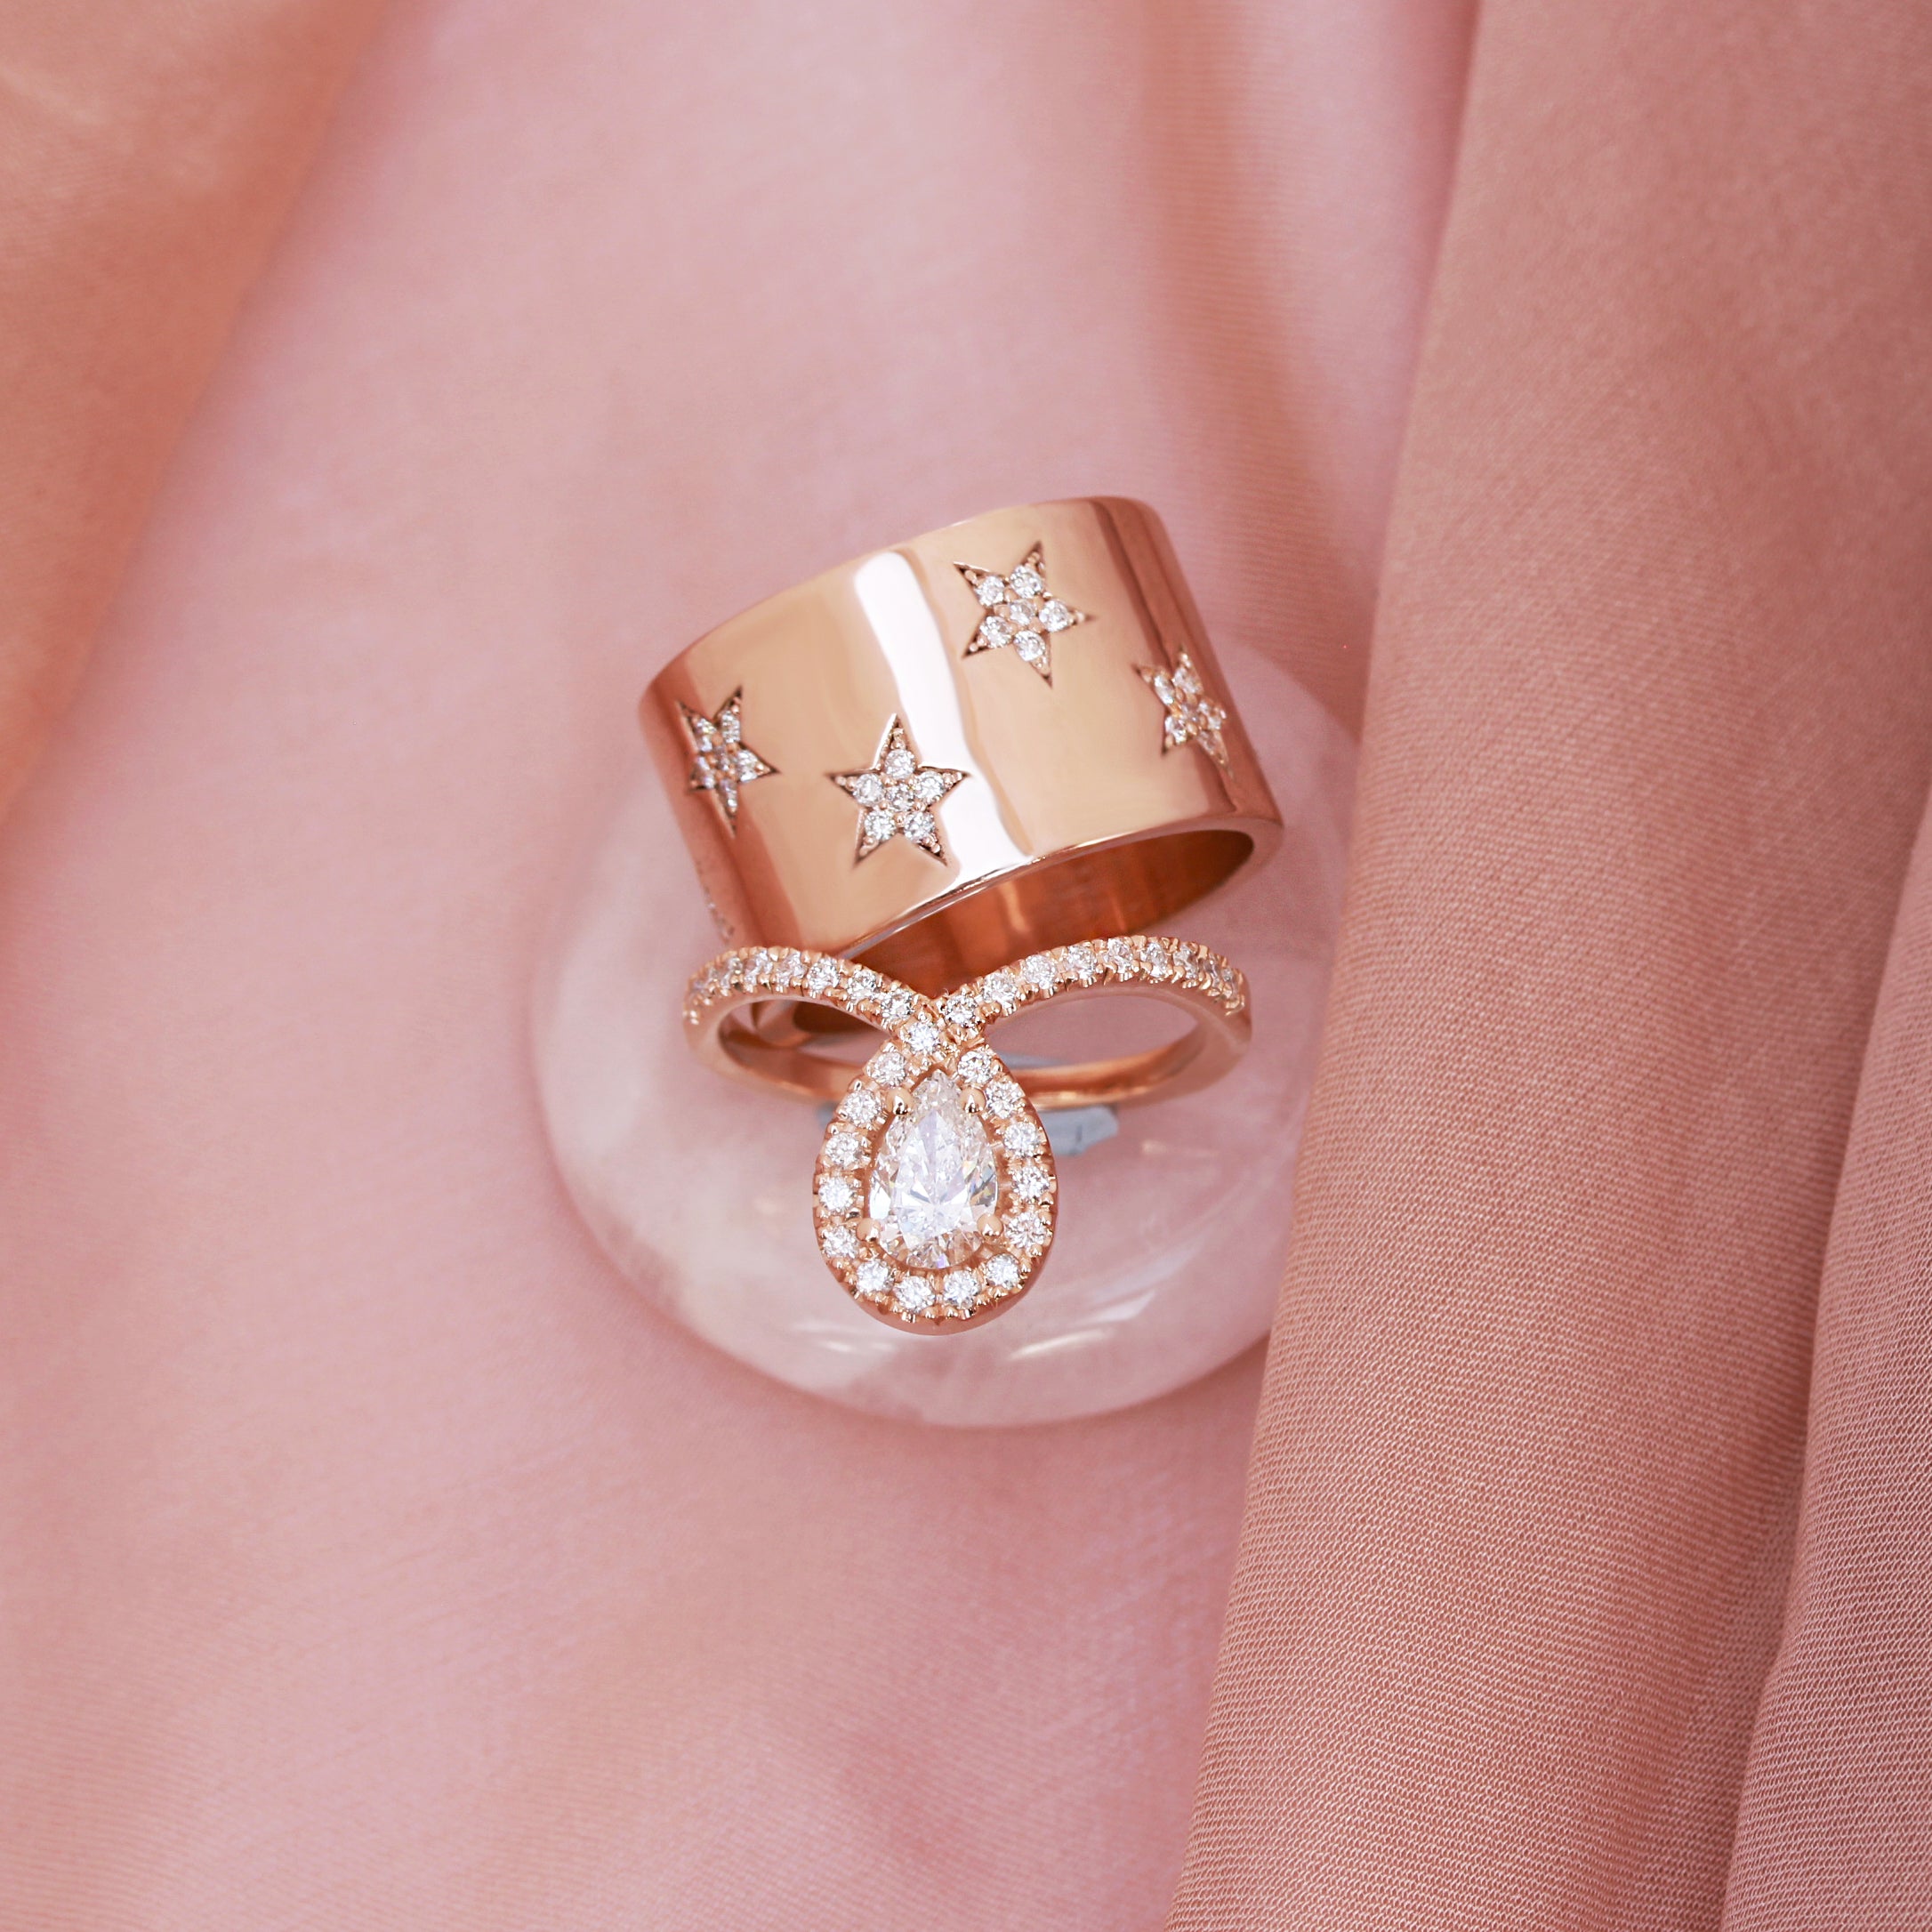 Louis Vuitton Star Blossom Ring In Pink Gold And Diamonds